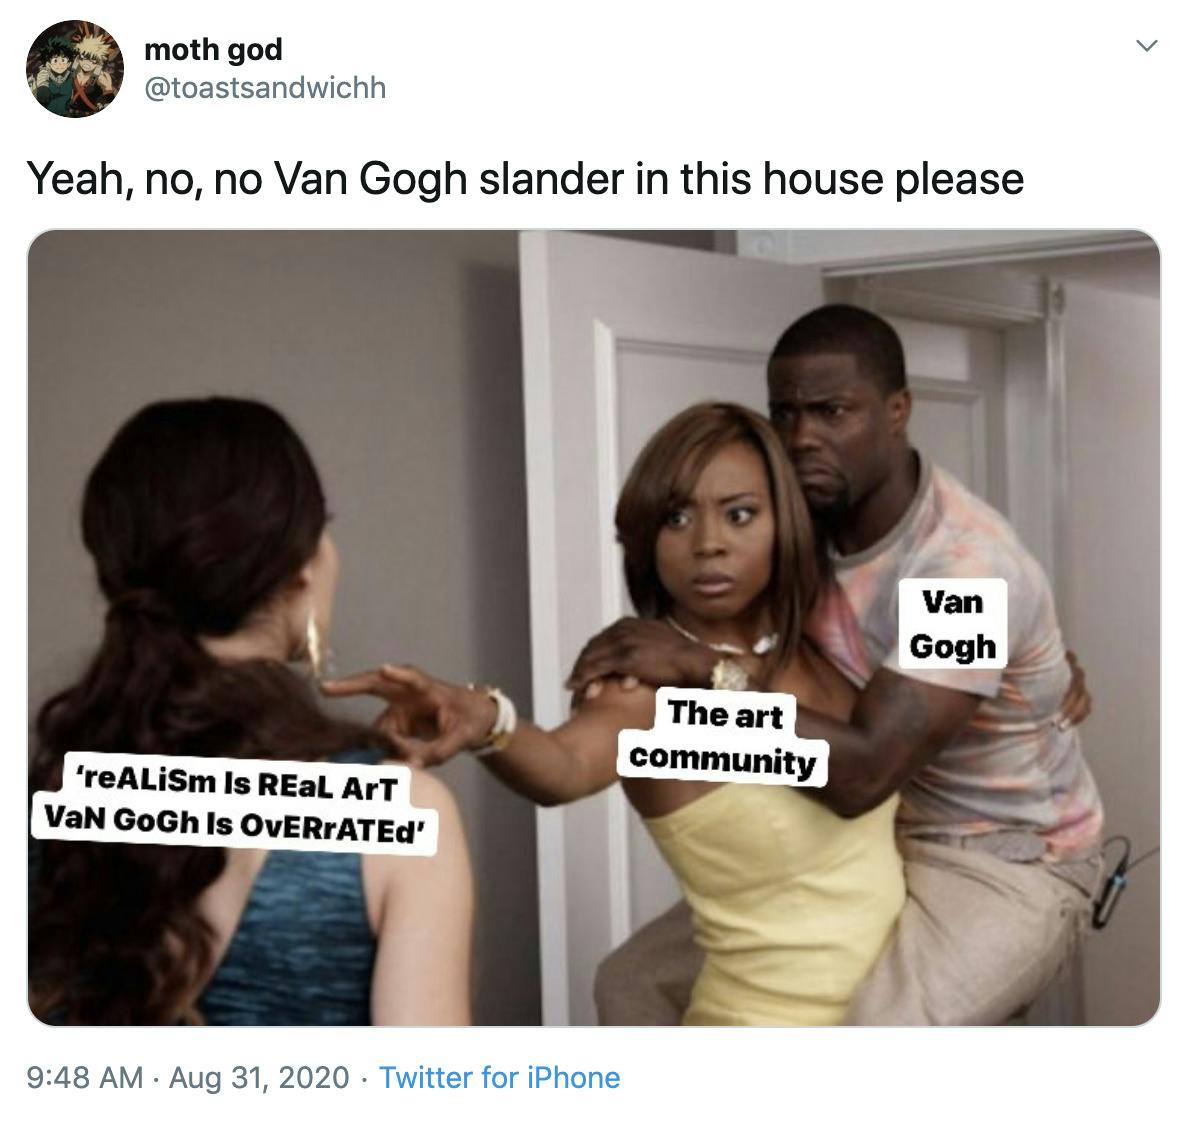 "Yeah, no, no Van Gogh slander in this house please" meme of a black man receiving a piggy back from a black woman in a yellow dress making the I'm watching you gesture at a dark haired woman. The man is labelled Van Gogh, the woman in yellow the art community and the other woman 'realism is the real art Van Gogh is overrated"